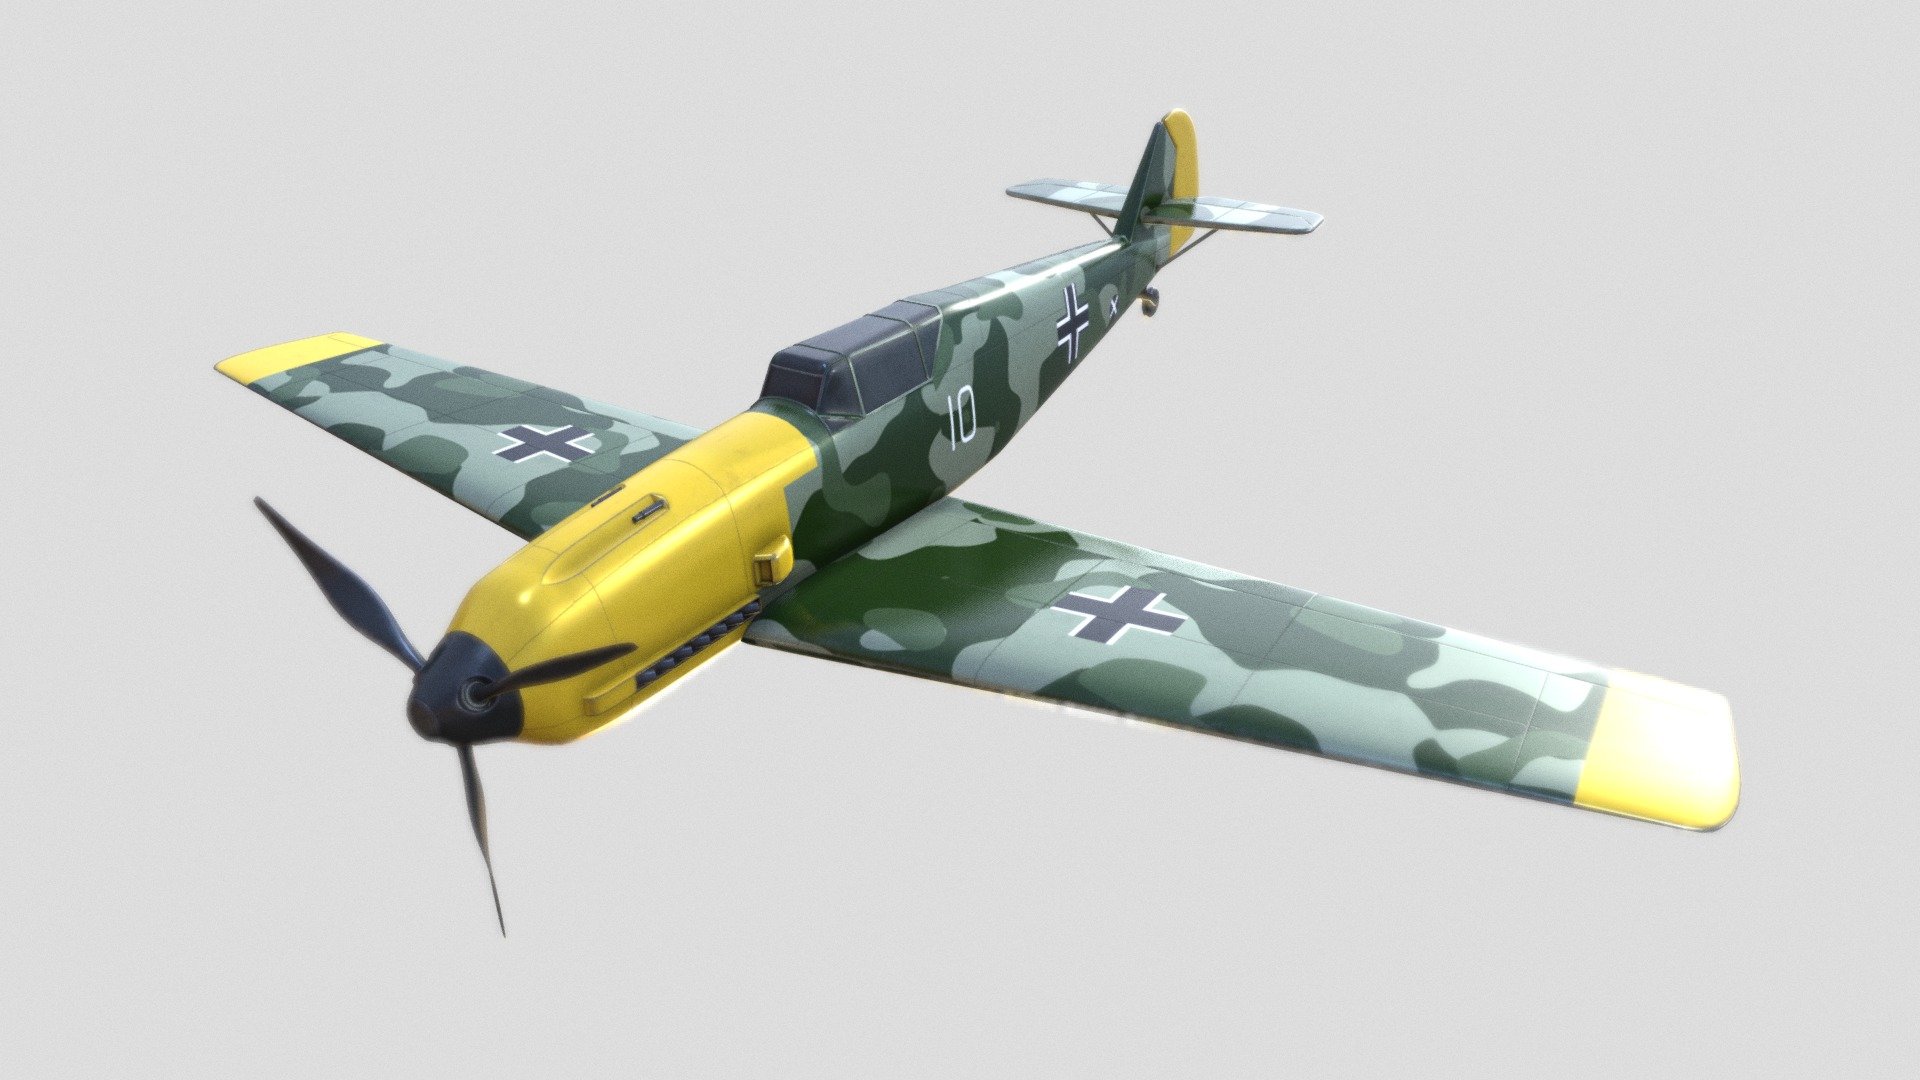 The Messerschmitt Bf 109, a legendary World War II-era German fighter aircraft, is captured brilliantly in your 3D model. Its iconic design, characterized by a sleek and streamlined fuselage, elliptical wings, and distinctive inverted V-shaped tail, is faithfully recreated. The intricate attention to detail, from the cockpit canopy to the propeller and landing gear, showcases your modeling expertise. The historical significance of the Bf 109 as a symbol of Luftwaffe's dominance in the early stages of the war is beautifully portrayed in your rendition, making it an impressive tribute to a pivotal aircraft in aviation history 3d model